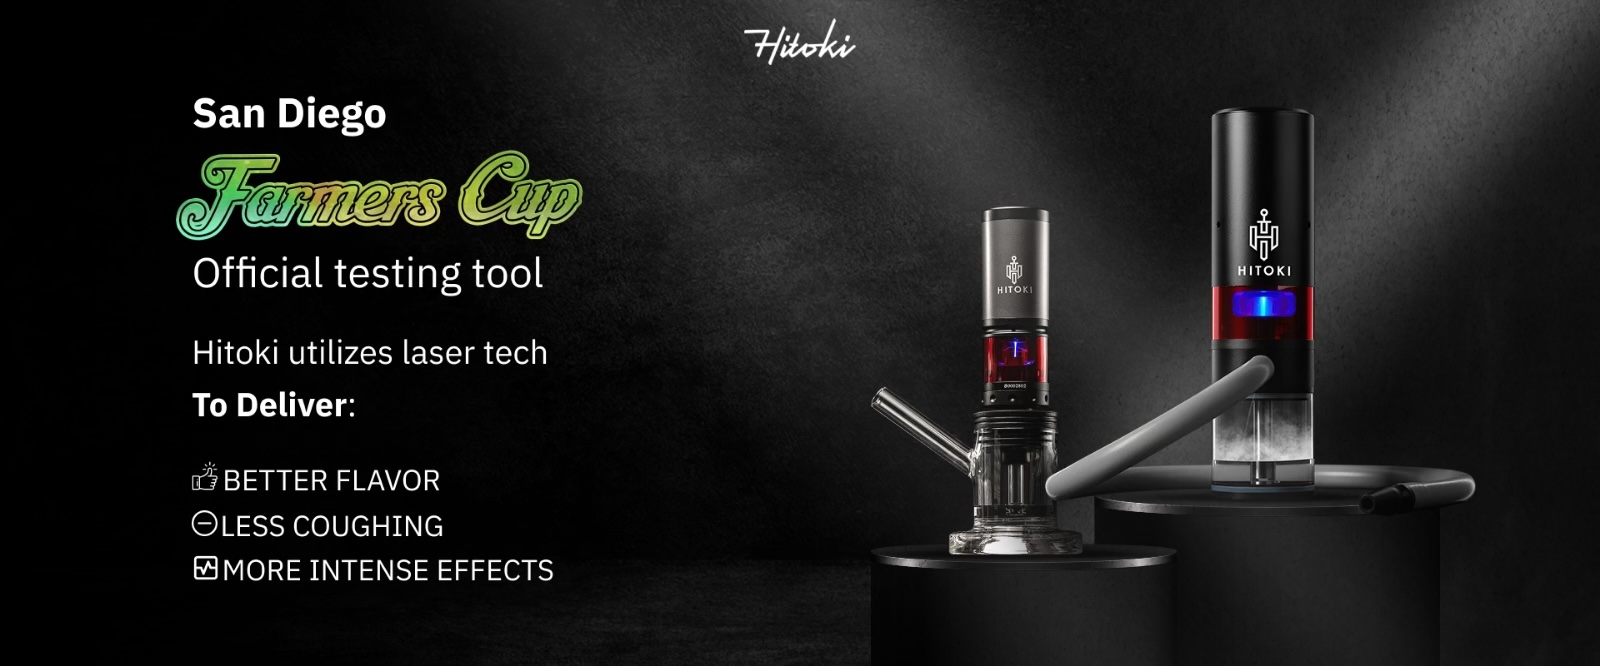 Hitoki Laser Bong for Better Flavor, Less Coughing, Smoother Hits, More Intese Effects, Cannabis, Weed